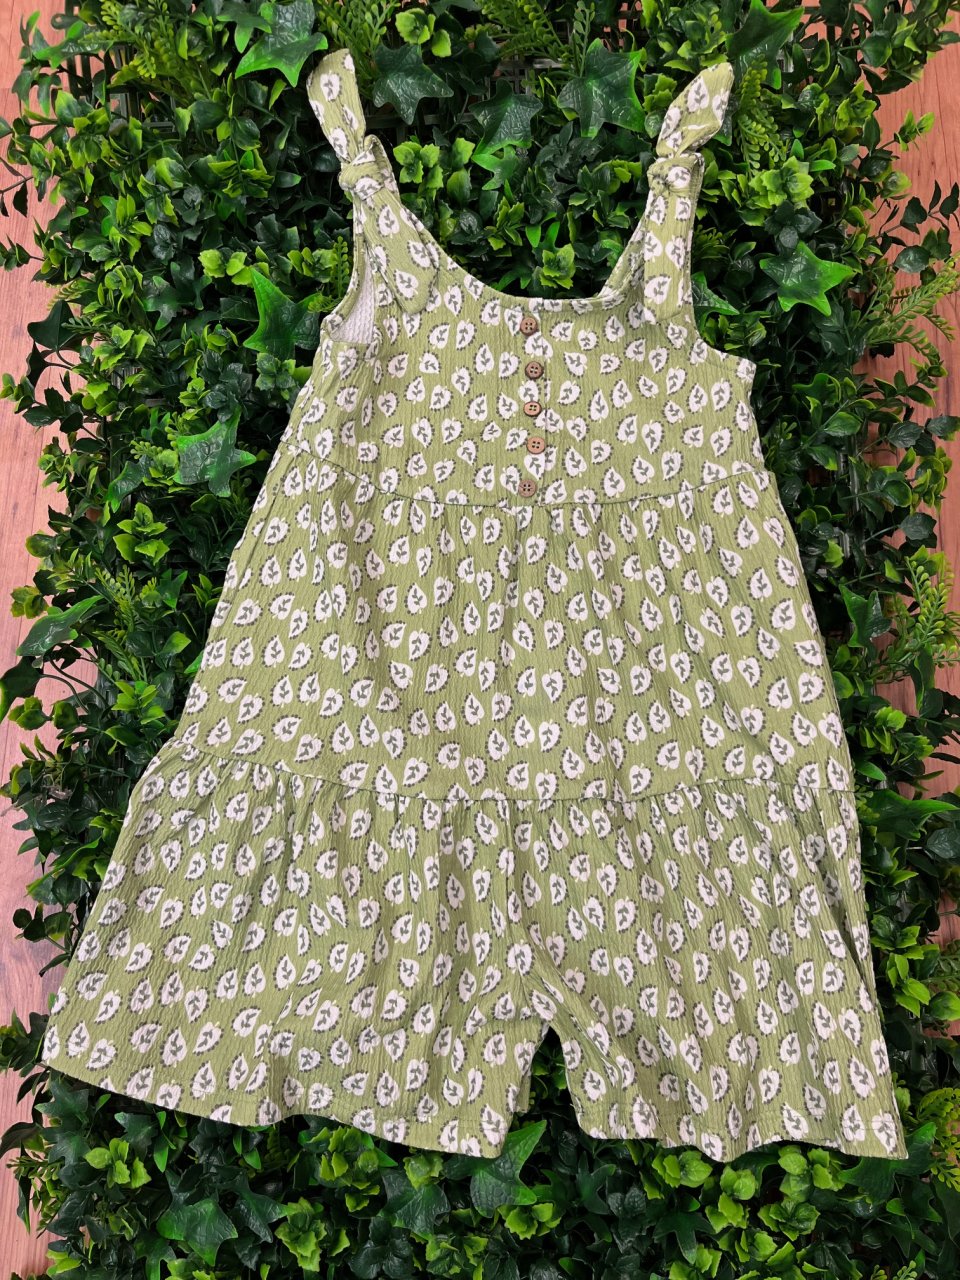 MAYORAL 3865  CRINKLE COTTON GREEN/WHITE  PLAYSUIT  WOODEN BUTTON AMD KNOT SHOULDER DETAIL 4,5,6,7,8, 9YRS ONLY